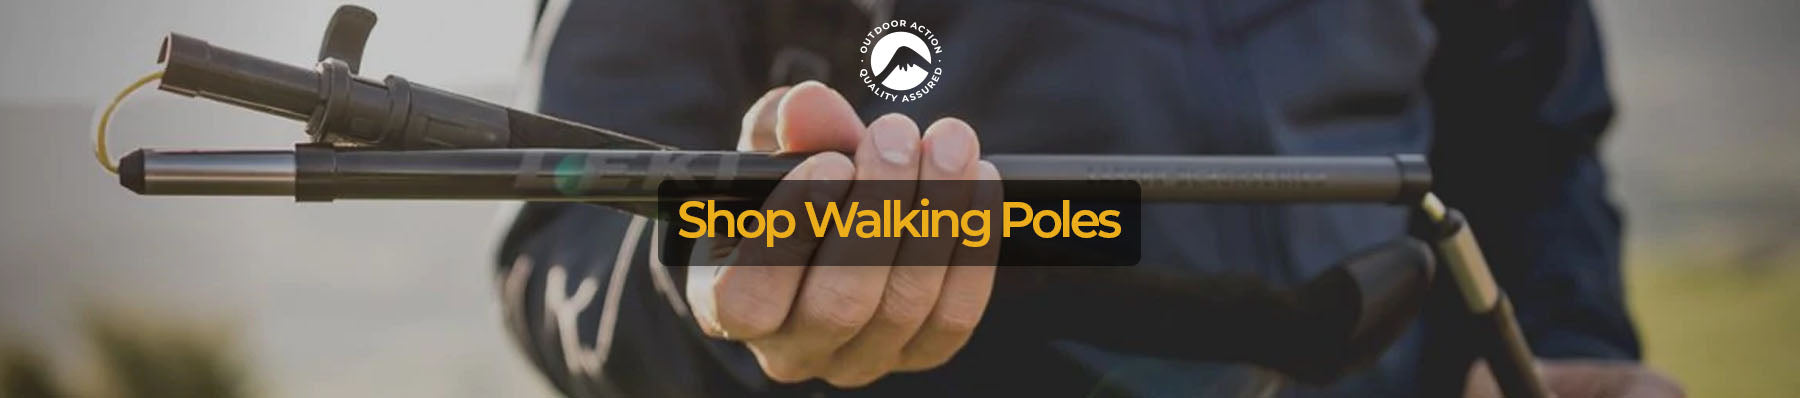 Shop Walking Poles online at Outdoor Action